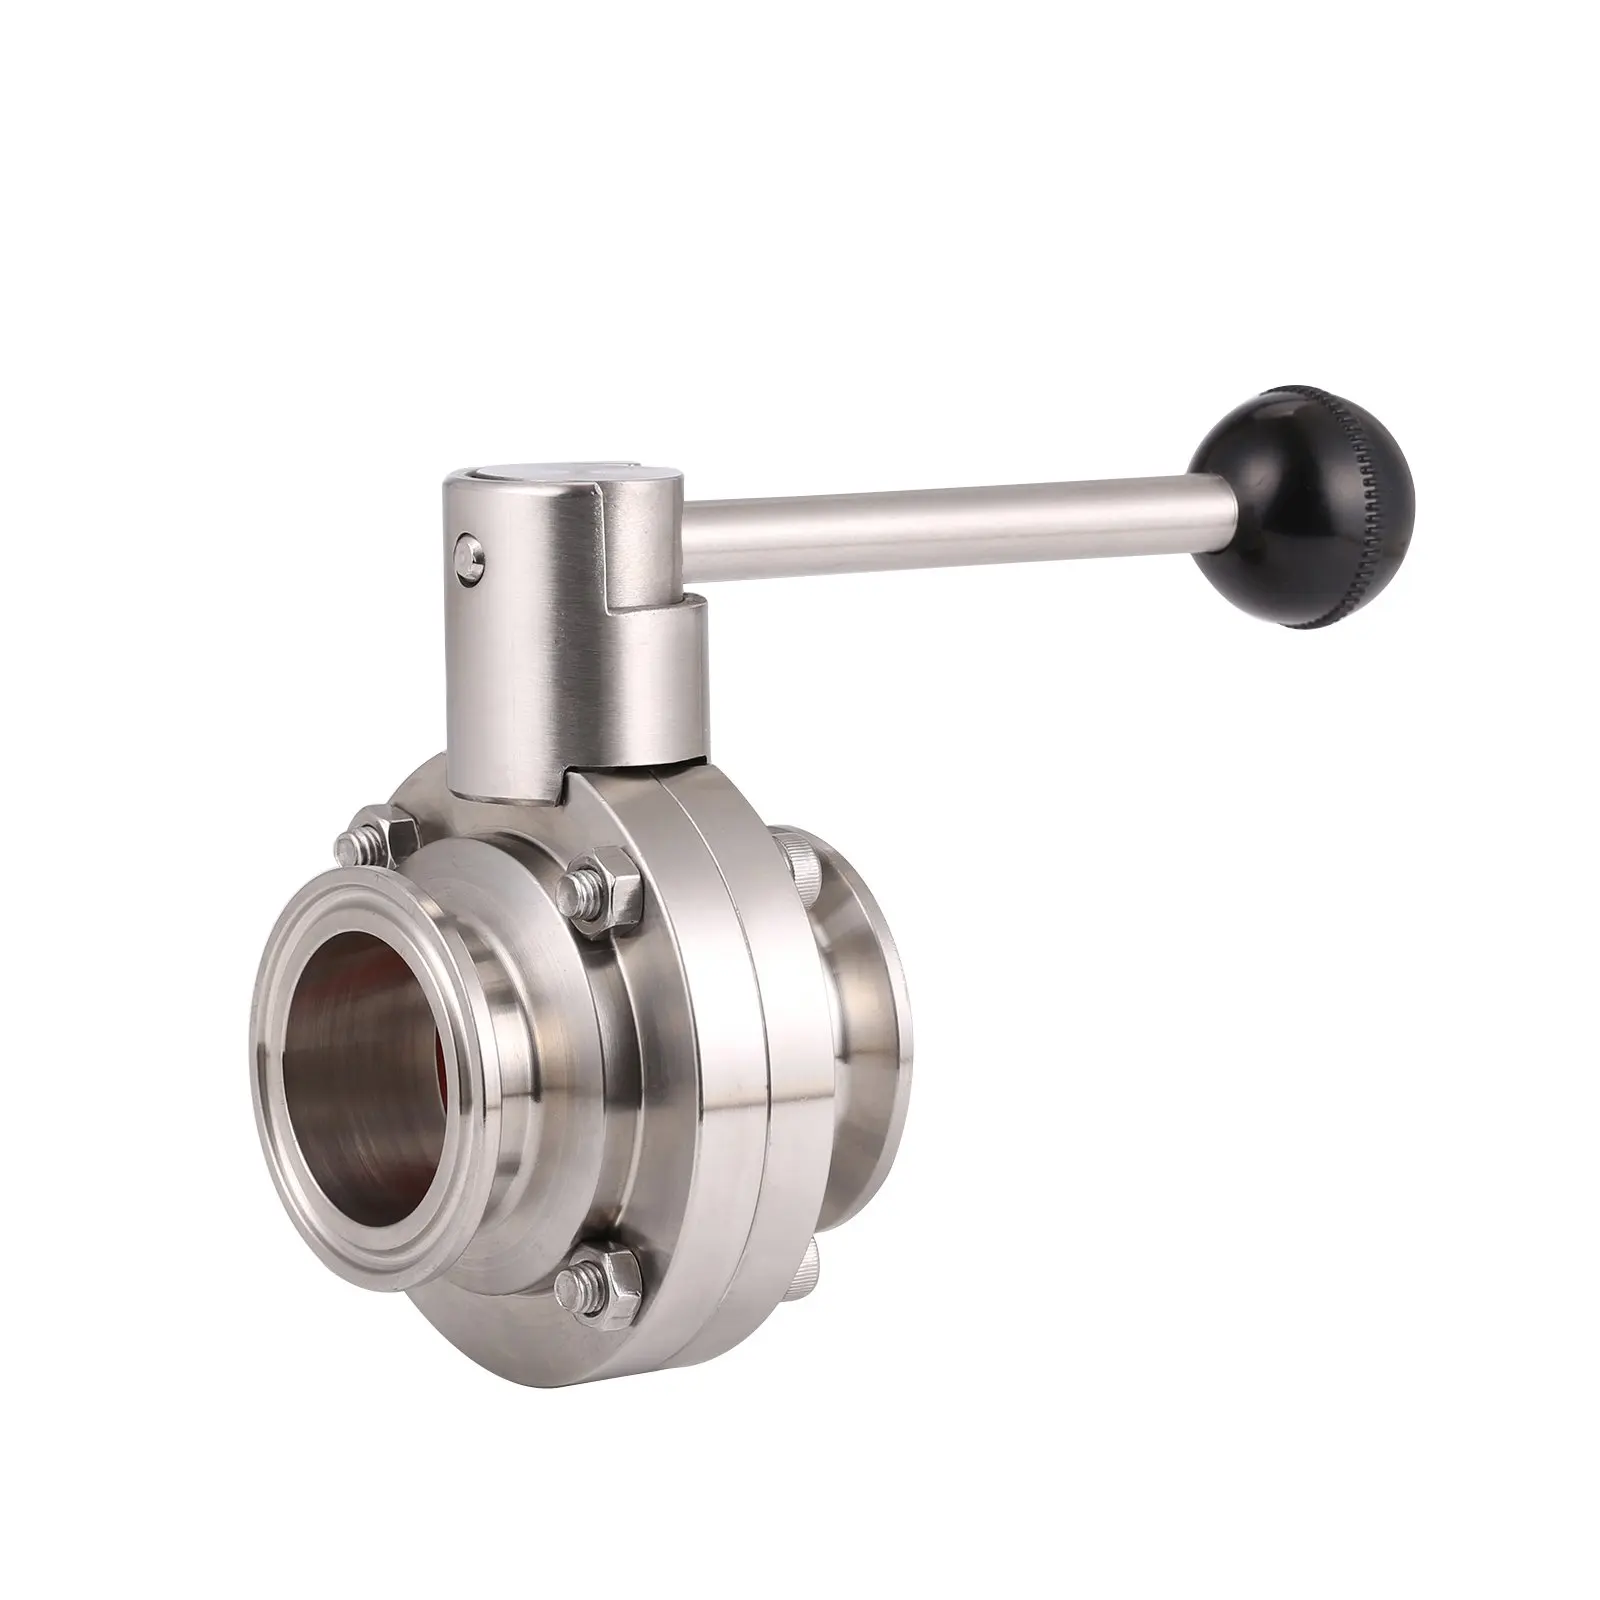 Trynox Clamp Sanitary Stainless Steel Butterfly Valve EPDM Seal 316L 3 Tri clamp Sanitary Fitting